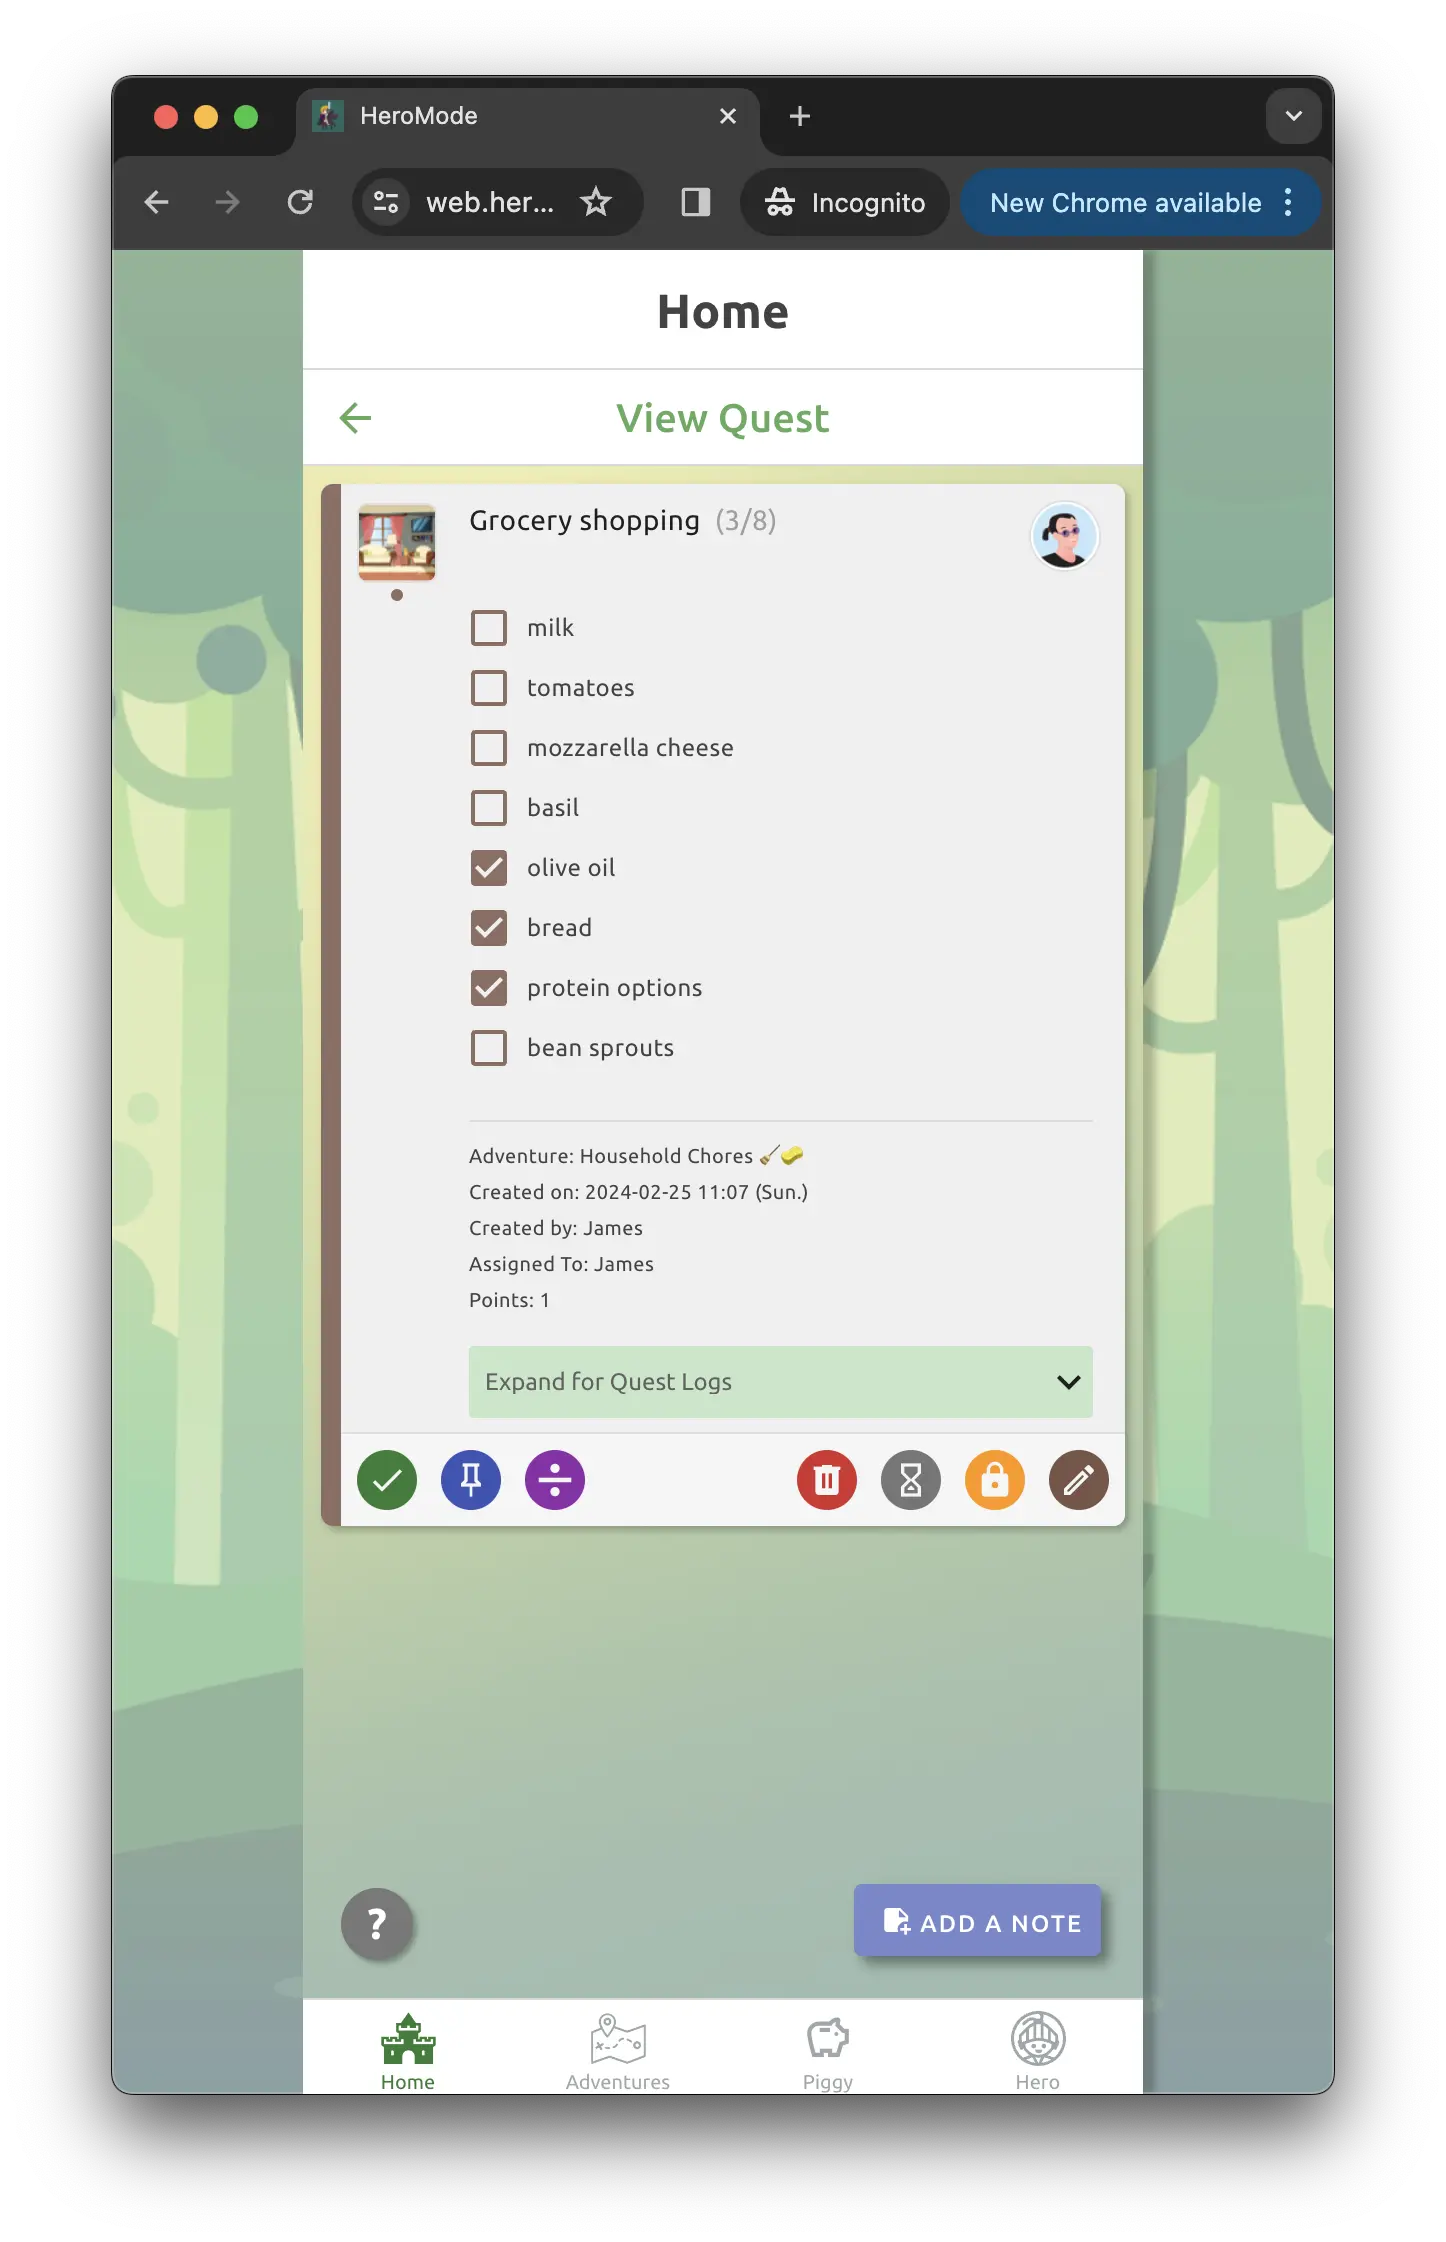 Use quest checkboxes to track grocery list, or any other list.